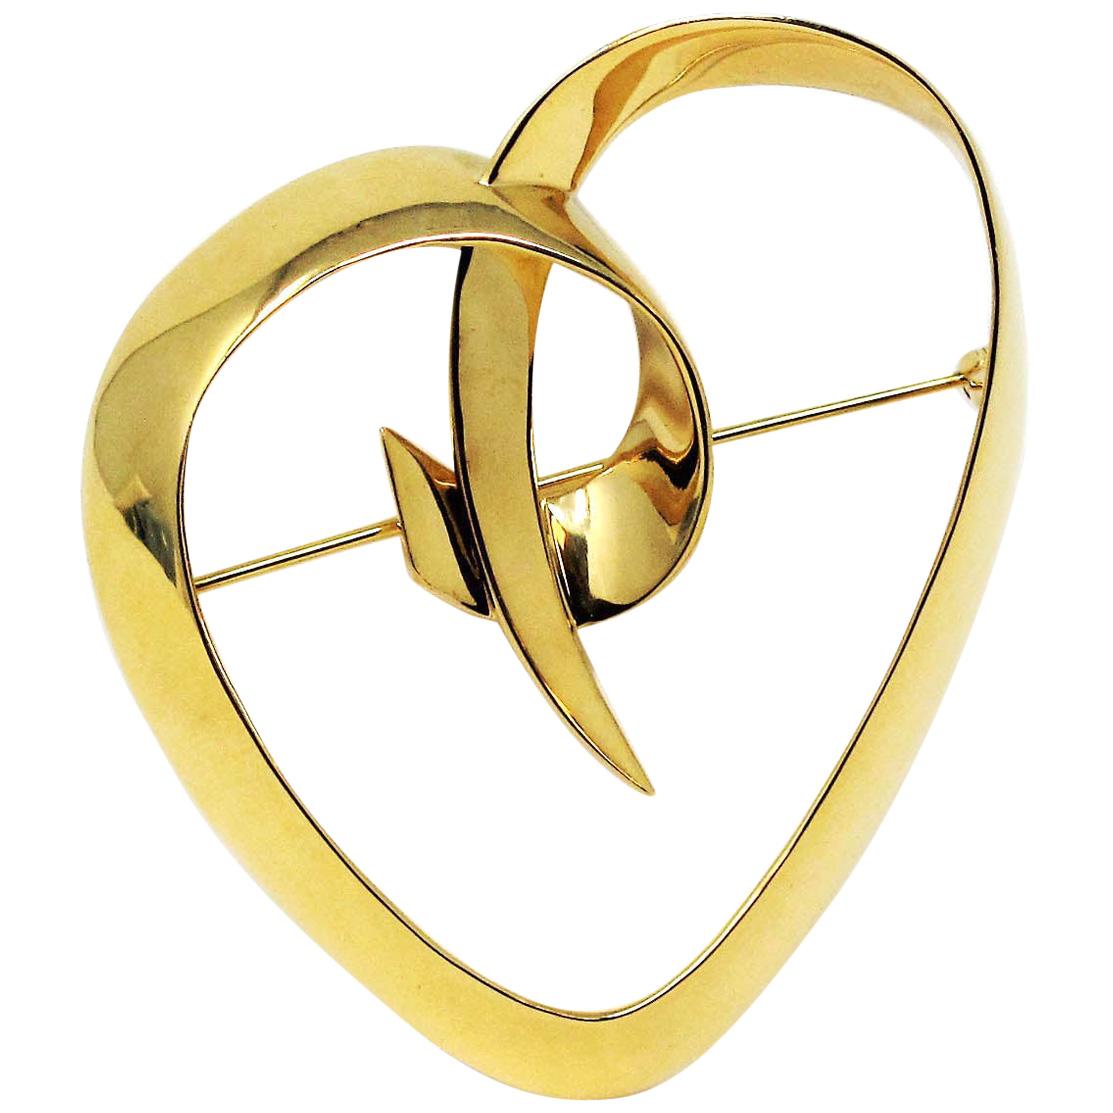 Paloma Picasso for Tiffany & Co. Large Heart Brooch Pin in 18 Karat Yellow Gold